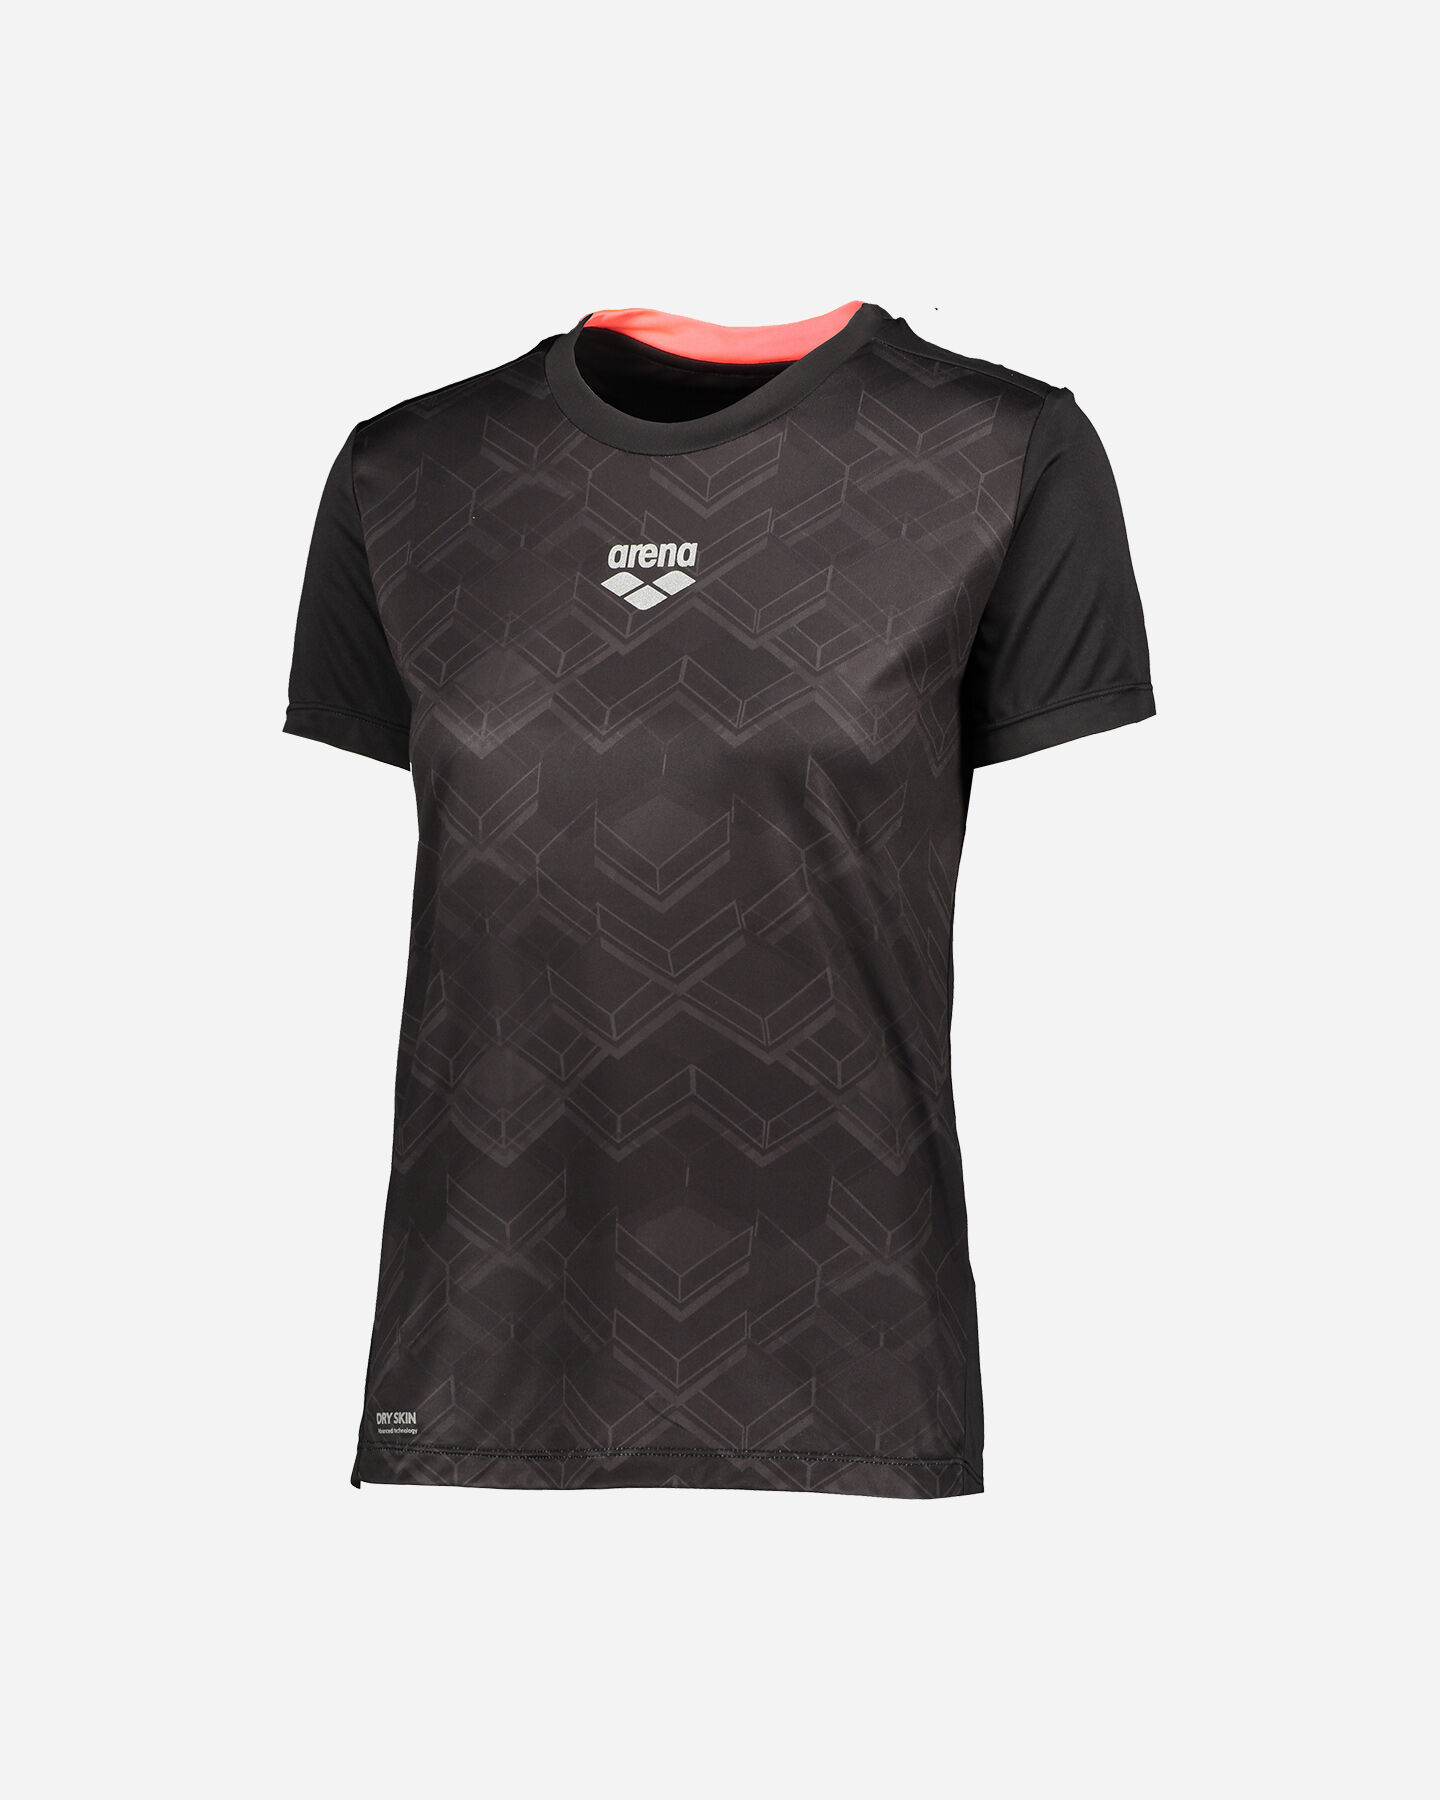  T-Shirt running ARENA AOP W S4088007|AOP|XS scatto 0